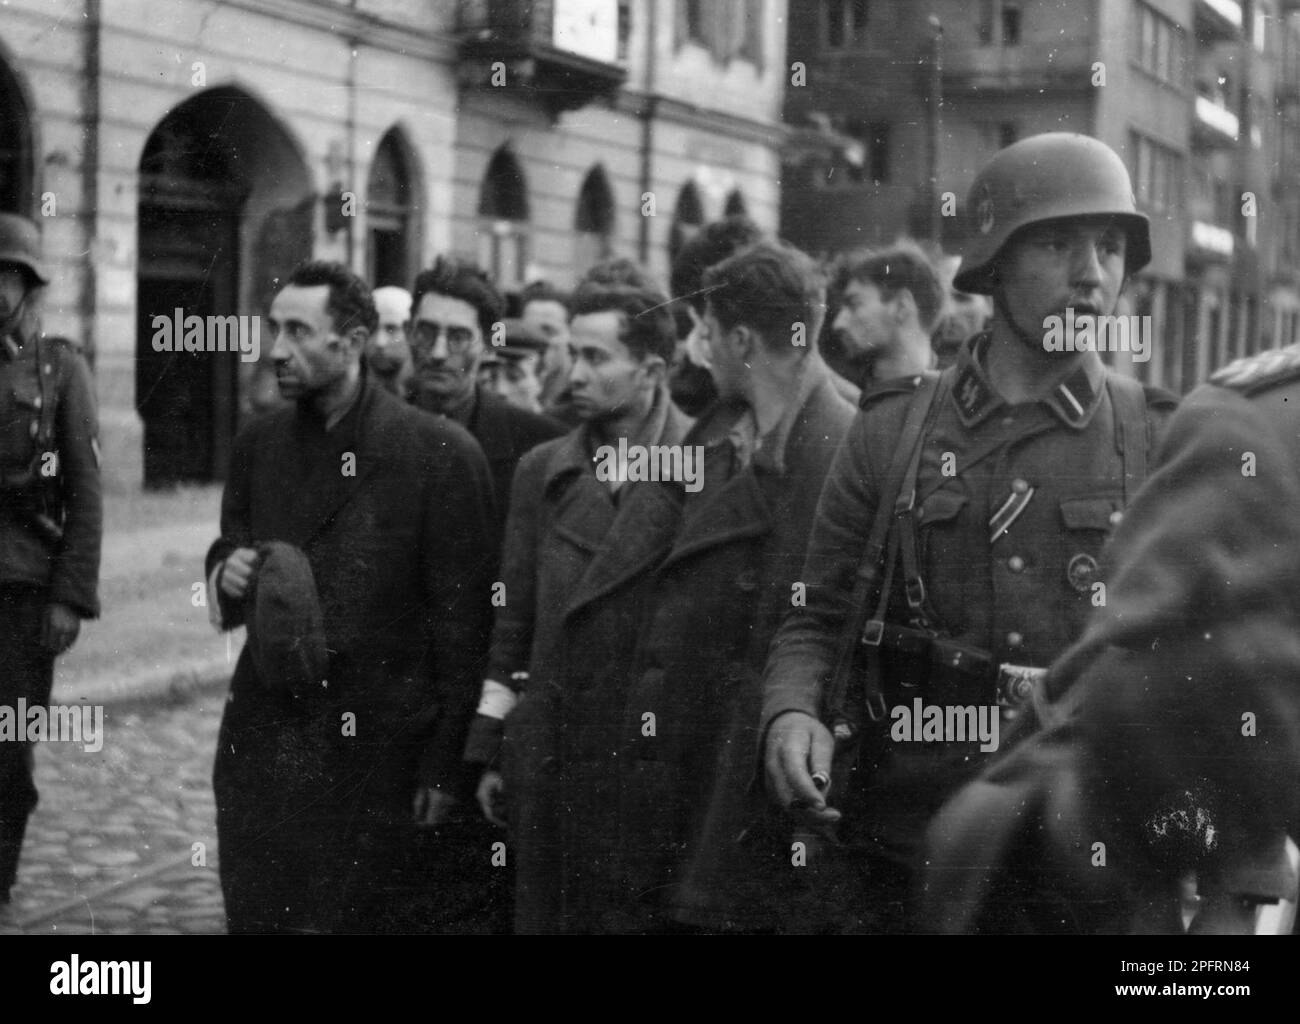 In January 1943 the nazis arrived to round up the Jews of the Warsaw Ghetto  The Jews, resolved to fight it out, took on the SS with homemade and primitive weapons. The defenders were executed or deported and the Ghetto area was systematically demolished. This event is known as The Ghetto Uprising.. This event is kinown as The Ghetto Uprising. This image shows captured fighters under guard in the street. This image is from the German photographic record of the event, known as the Stroop report. Stock Photo